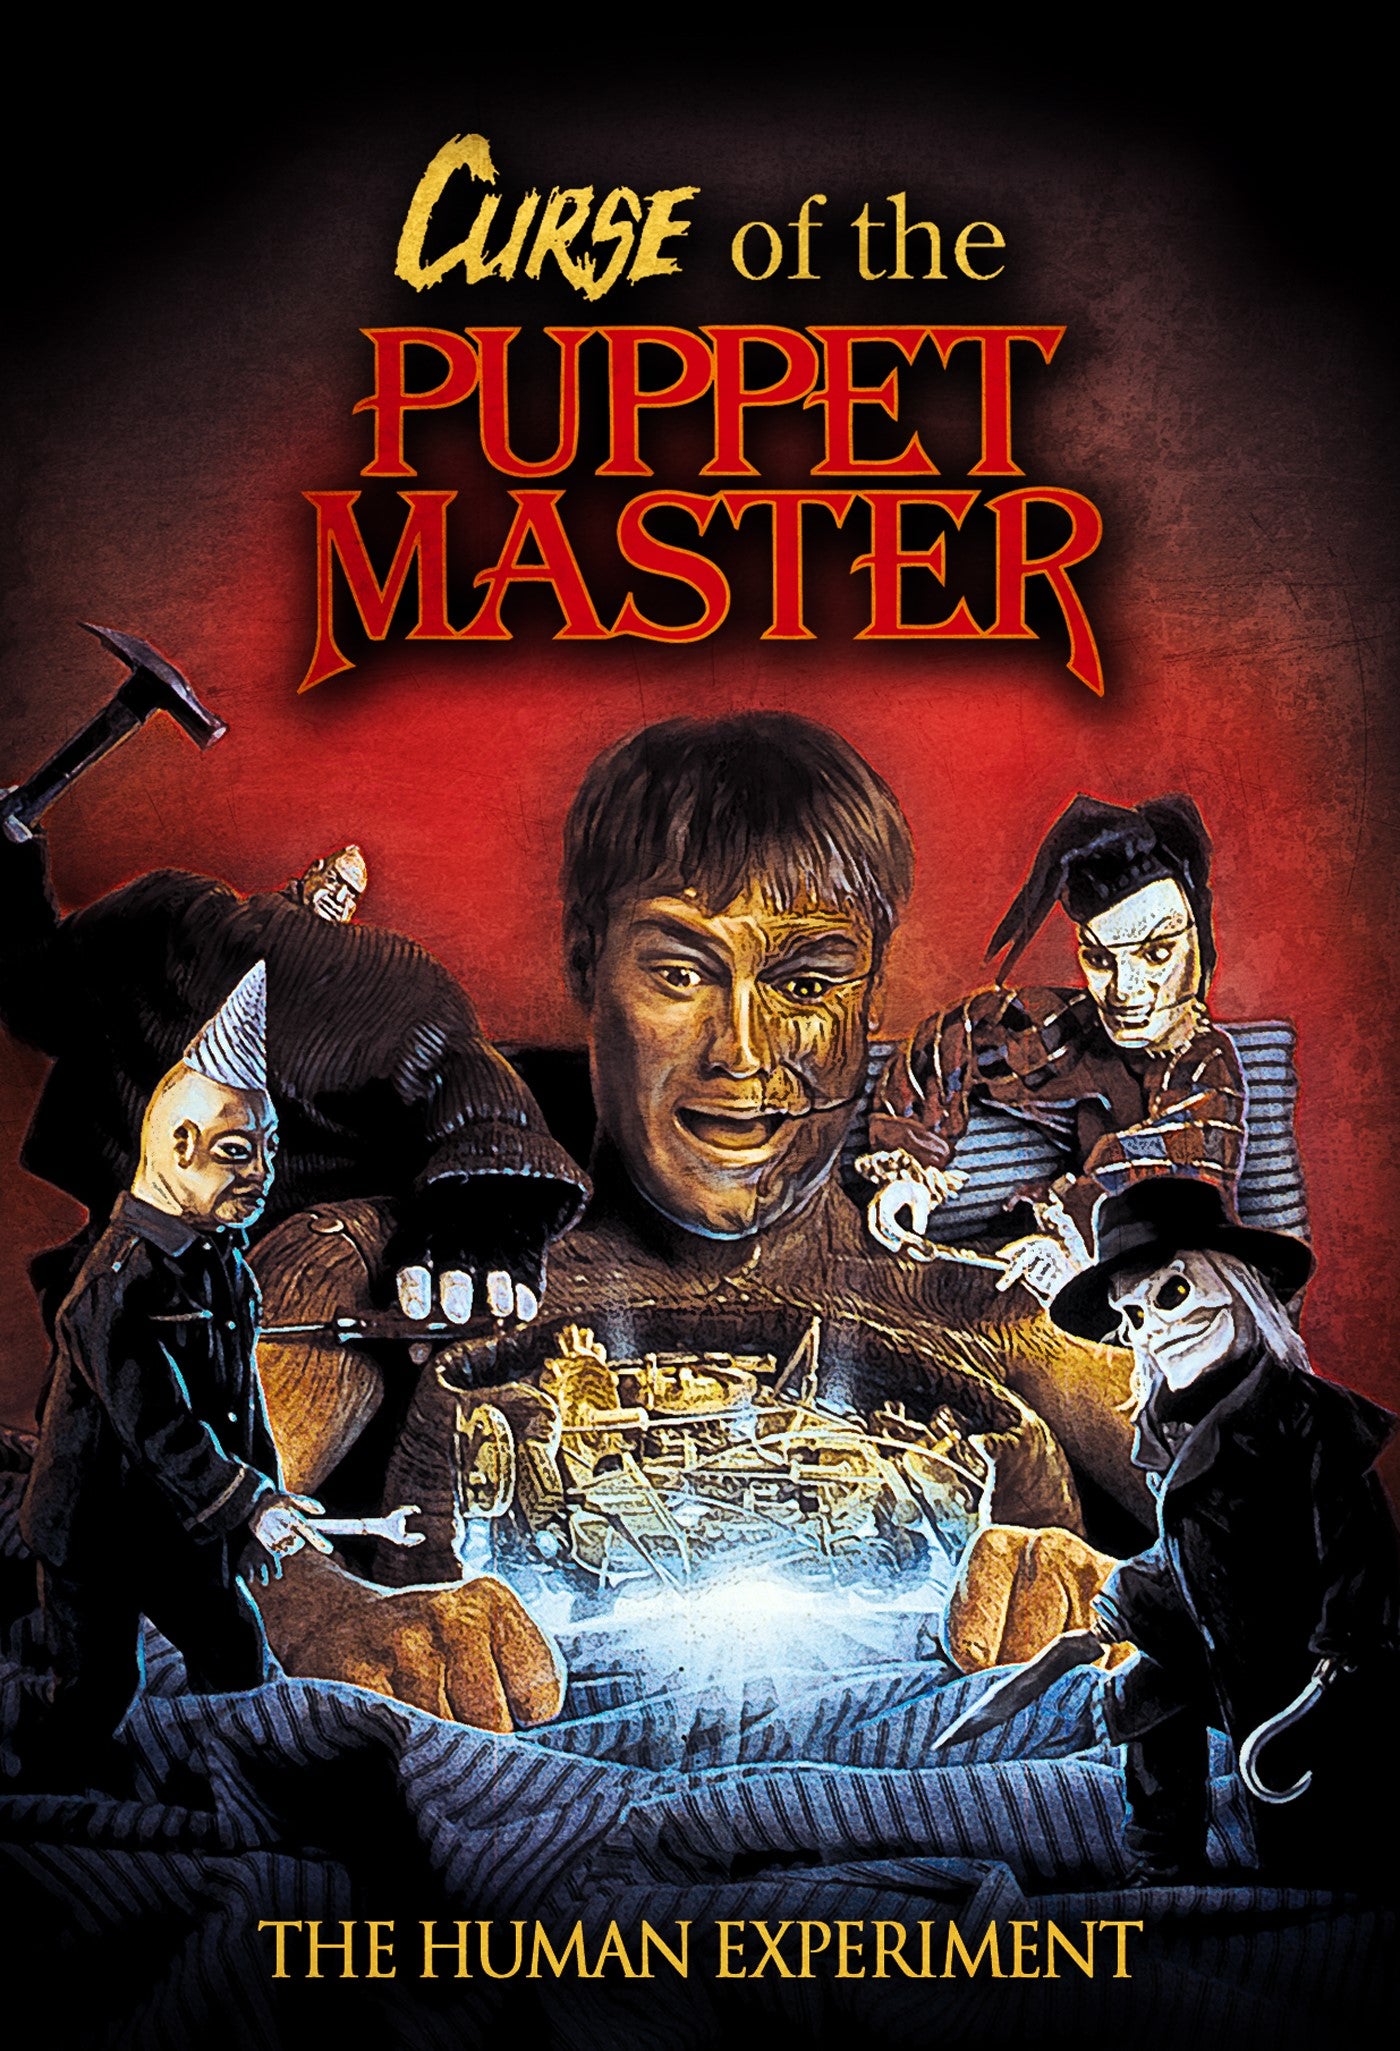 CURSE OF THE PUPPET MASTER BLU-RAY